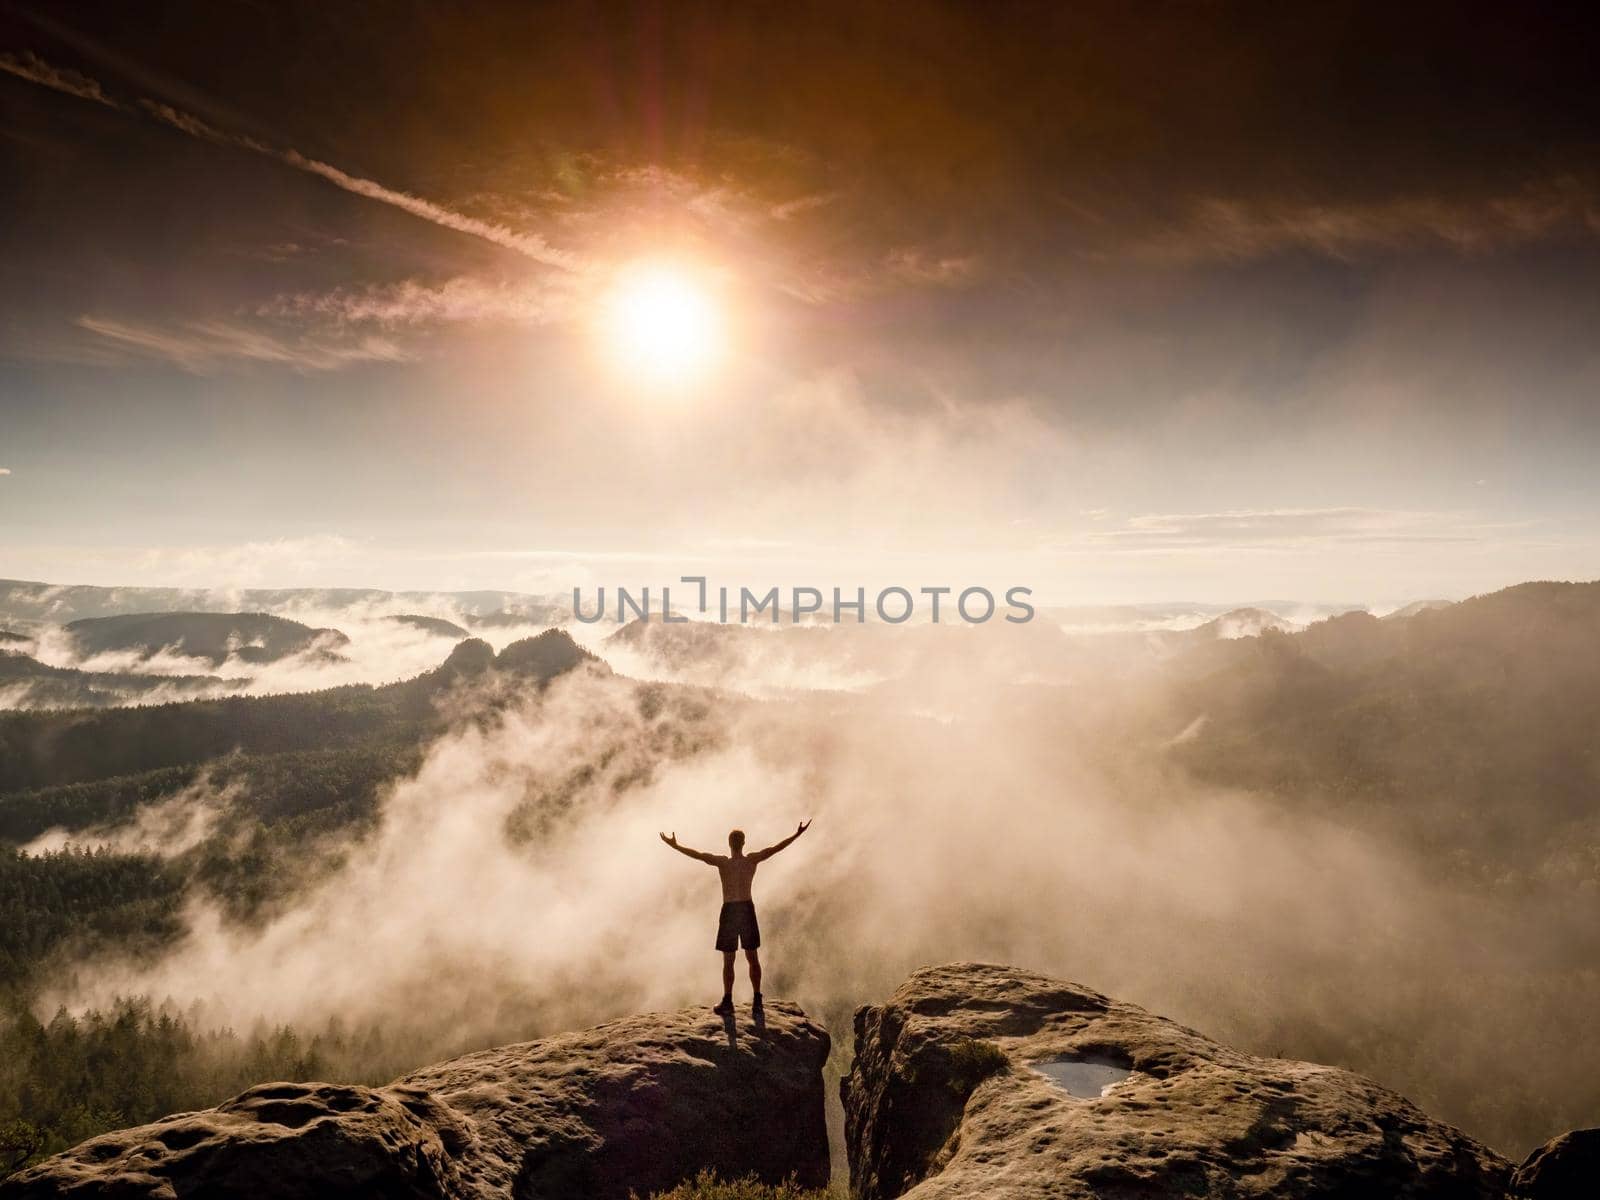 Young man standing on a cliff edge celebrates reaching the top of the mountain, arms in the air, shouting.